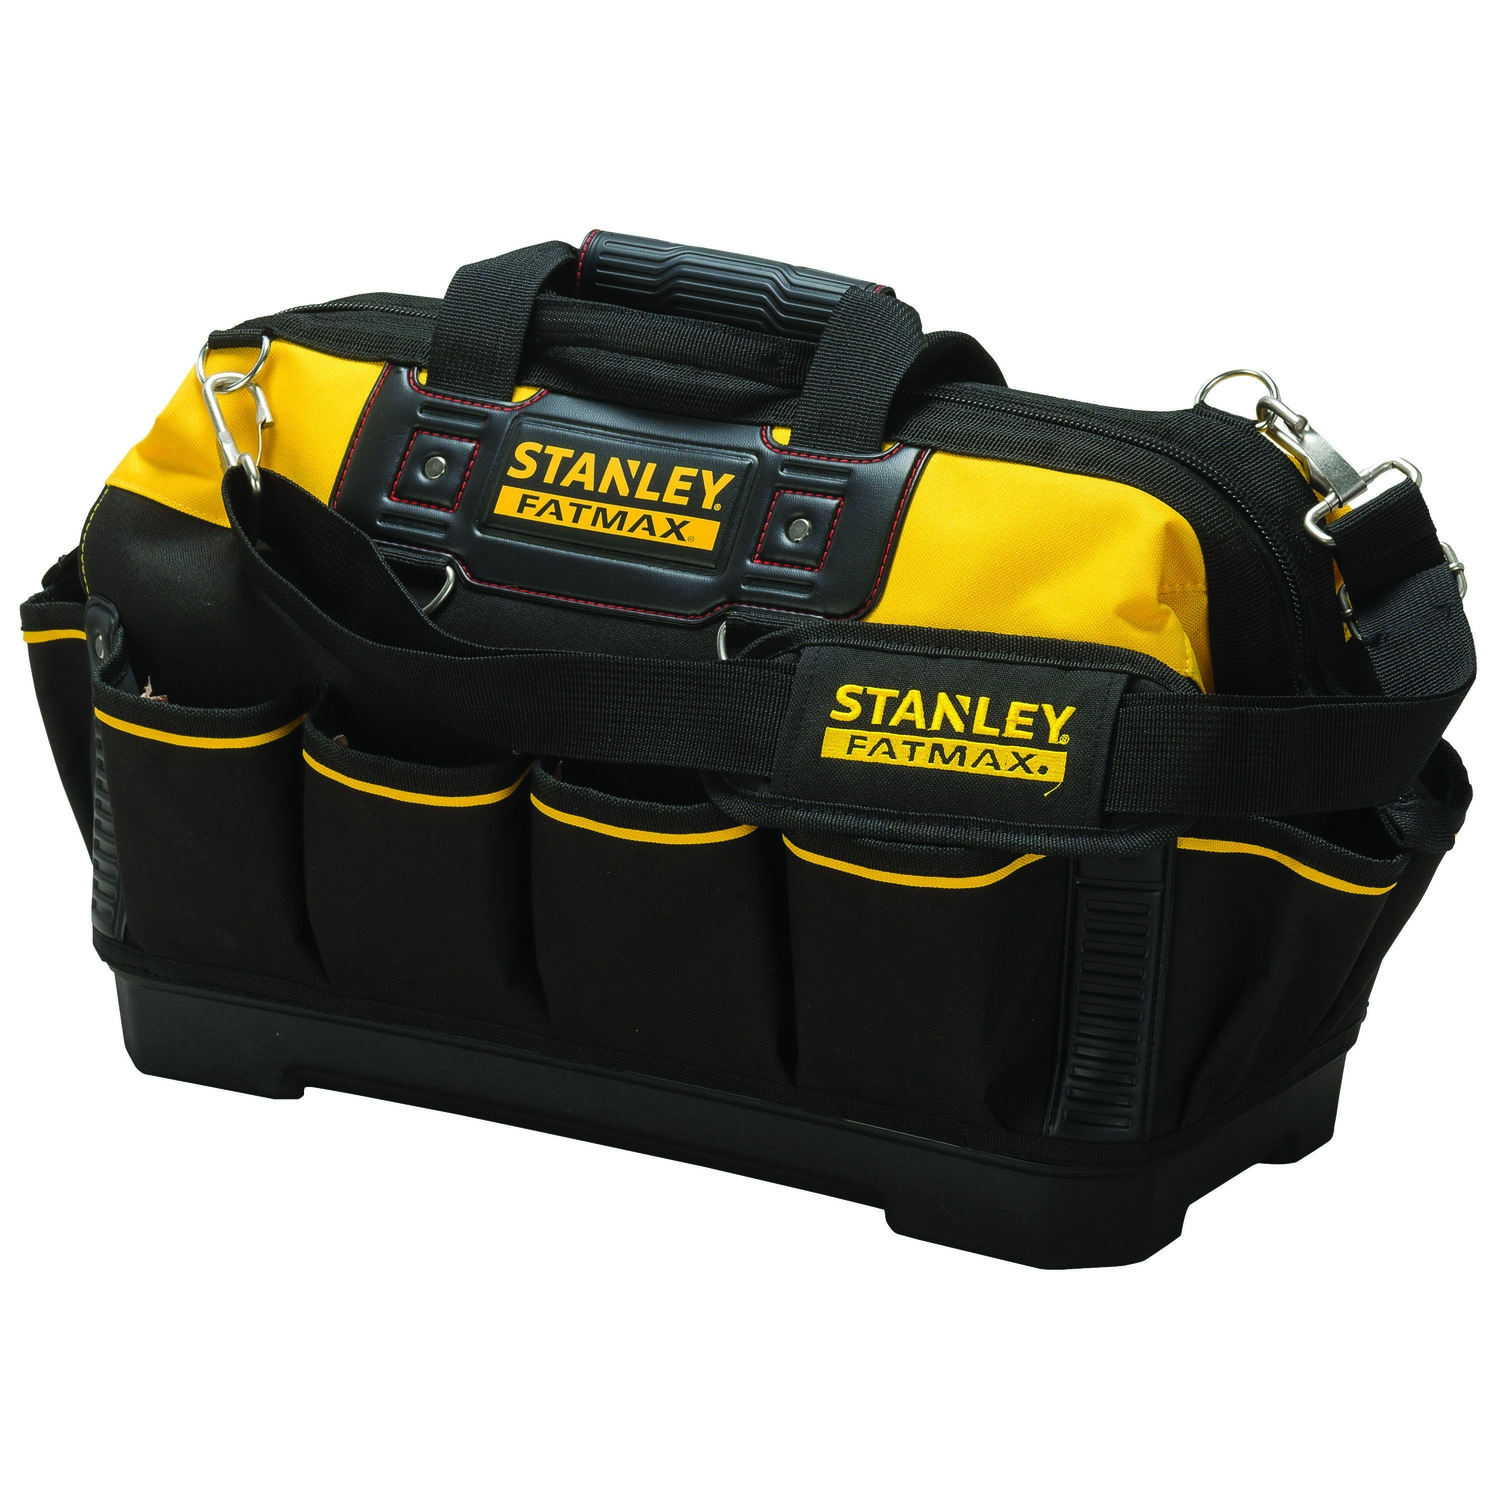 Photos - Tool Box Stanley FatMax 10 in. W X 12 in. H Polyester Tool Bag 16 pocket Black/Yell 